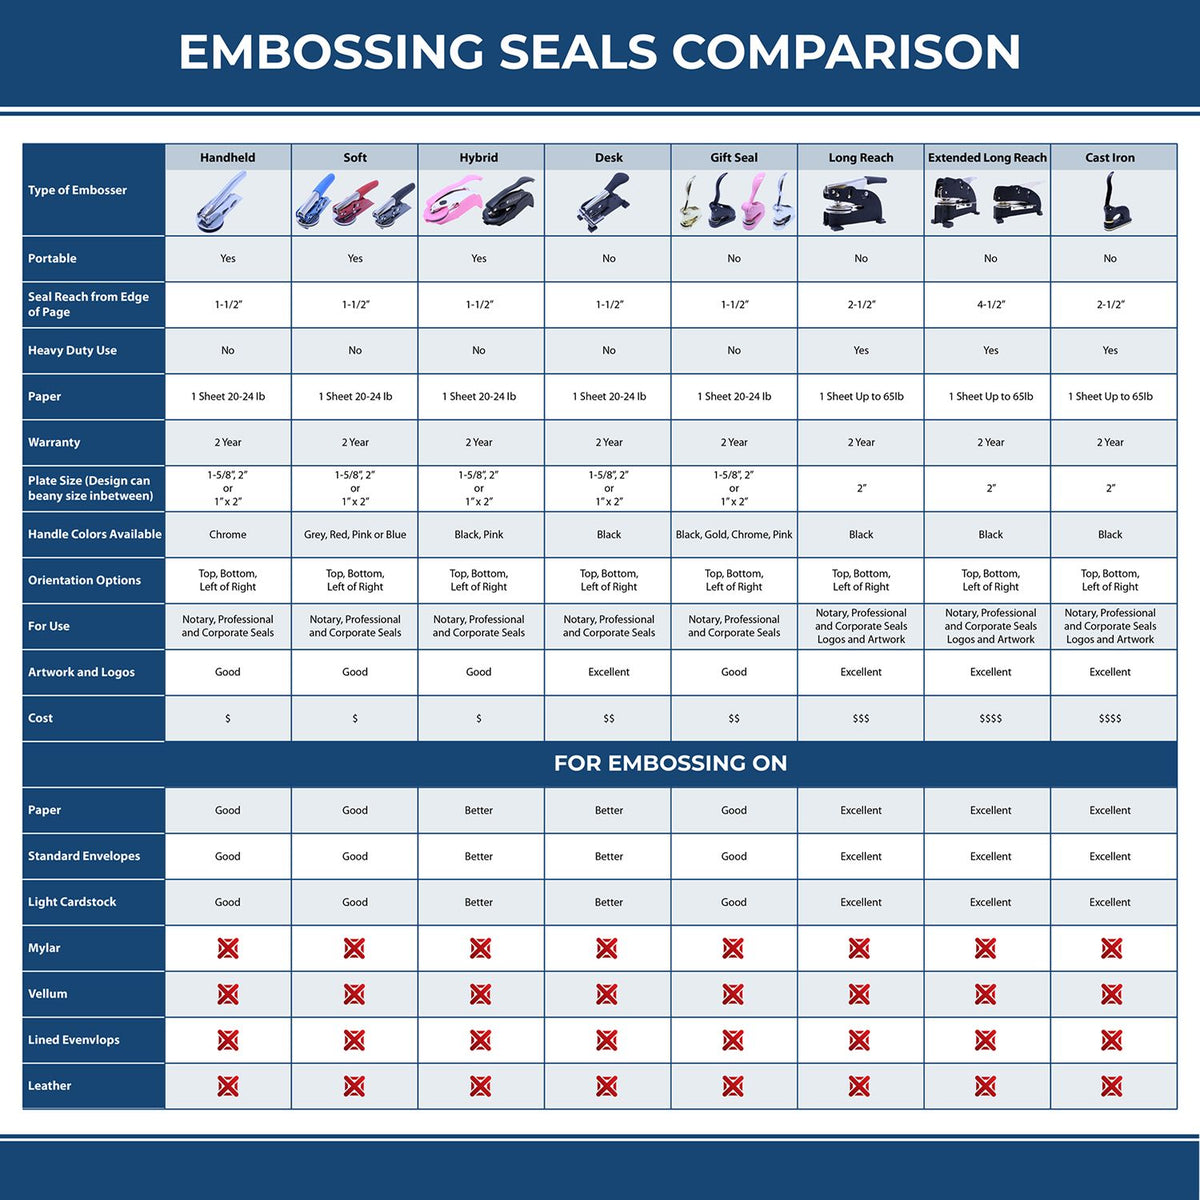 A comparison chart for the different types of mount models available for the Handheld Arizona Professional Geologist Embosser